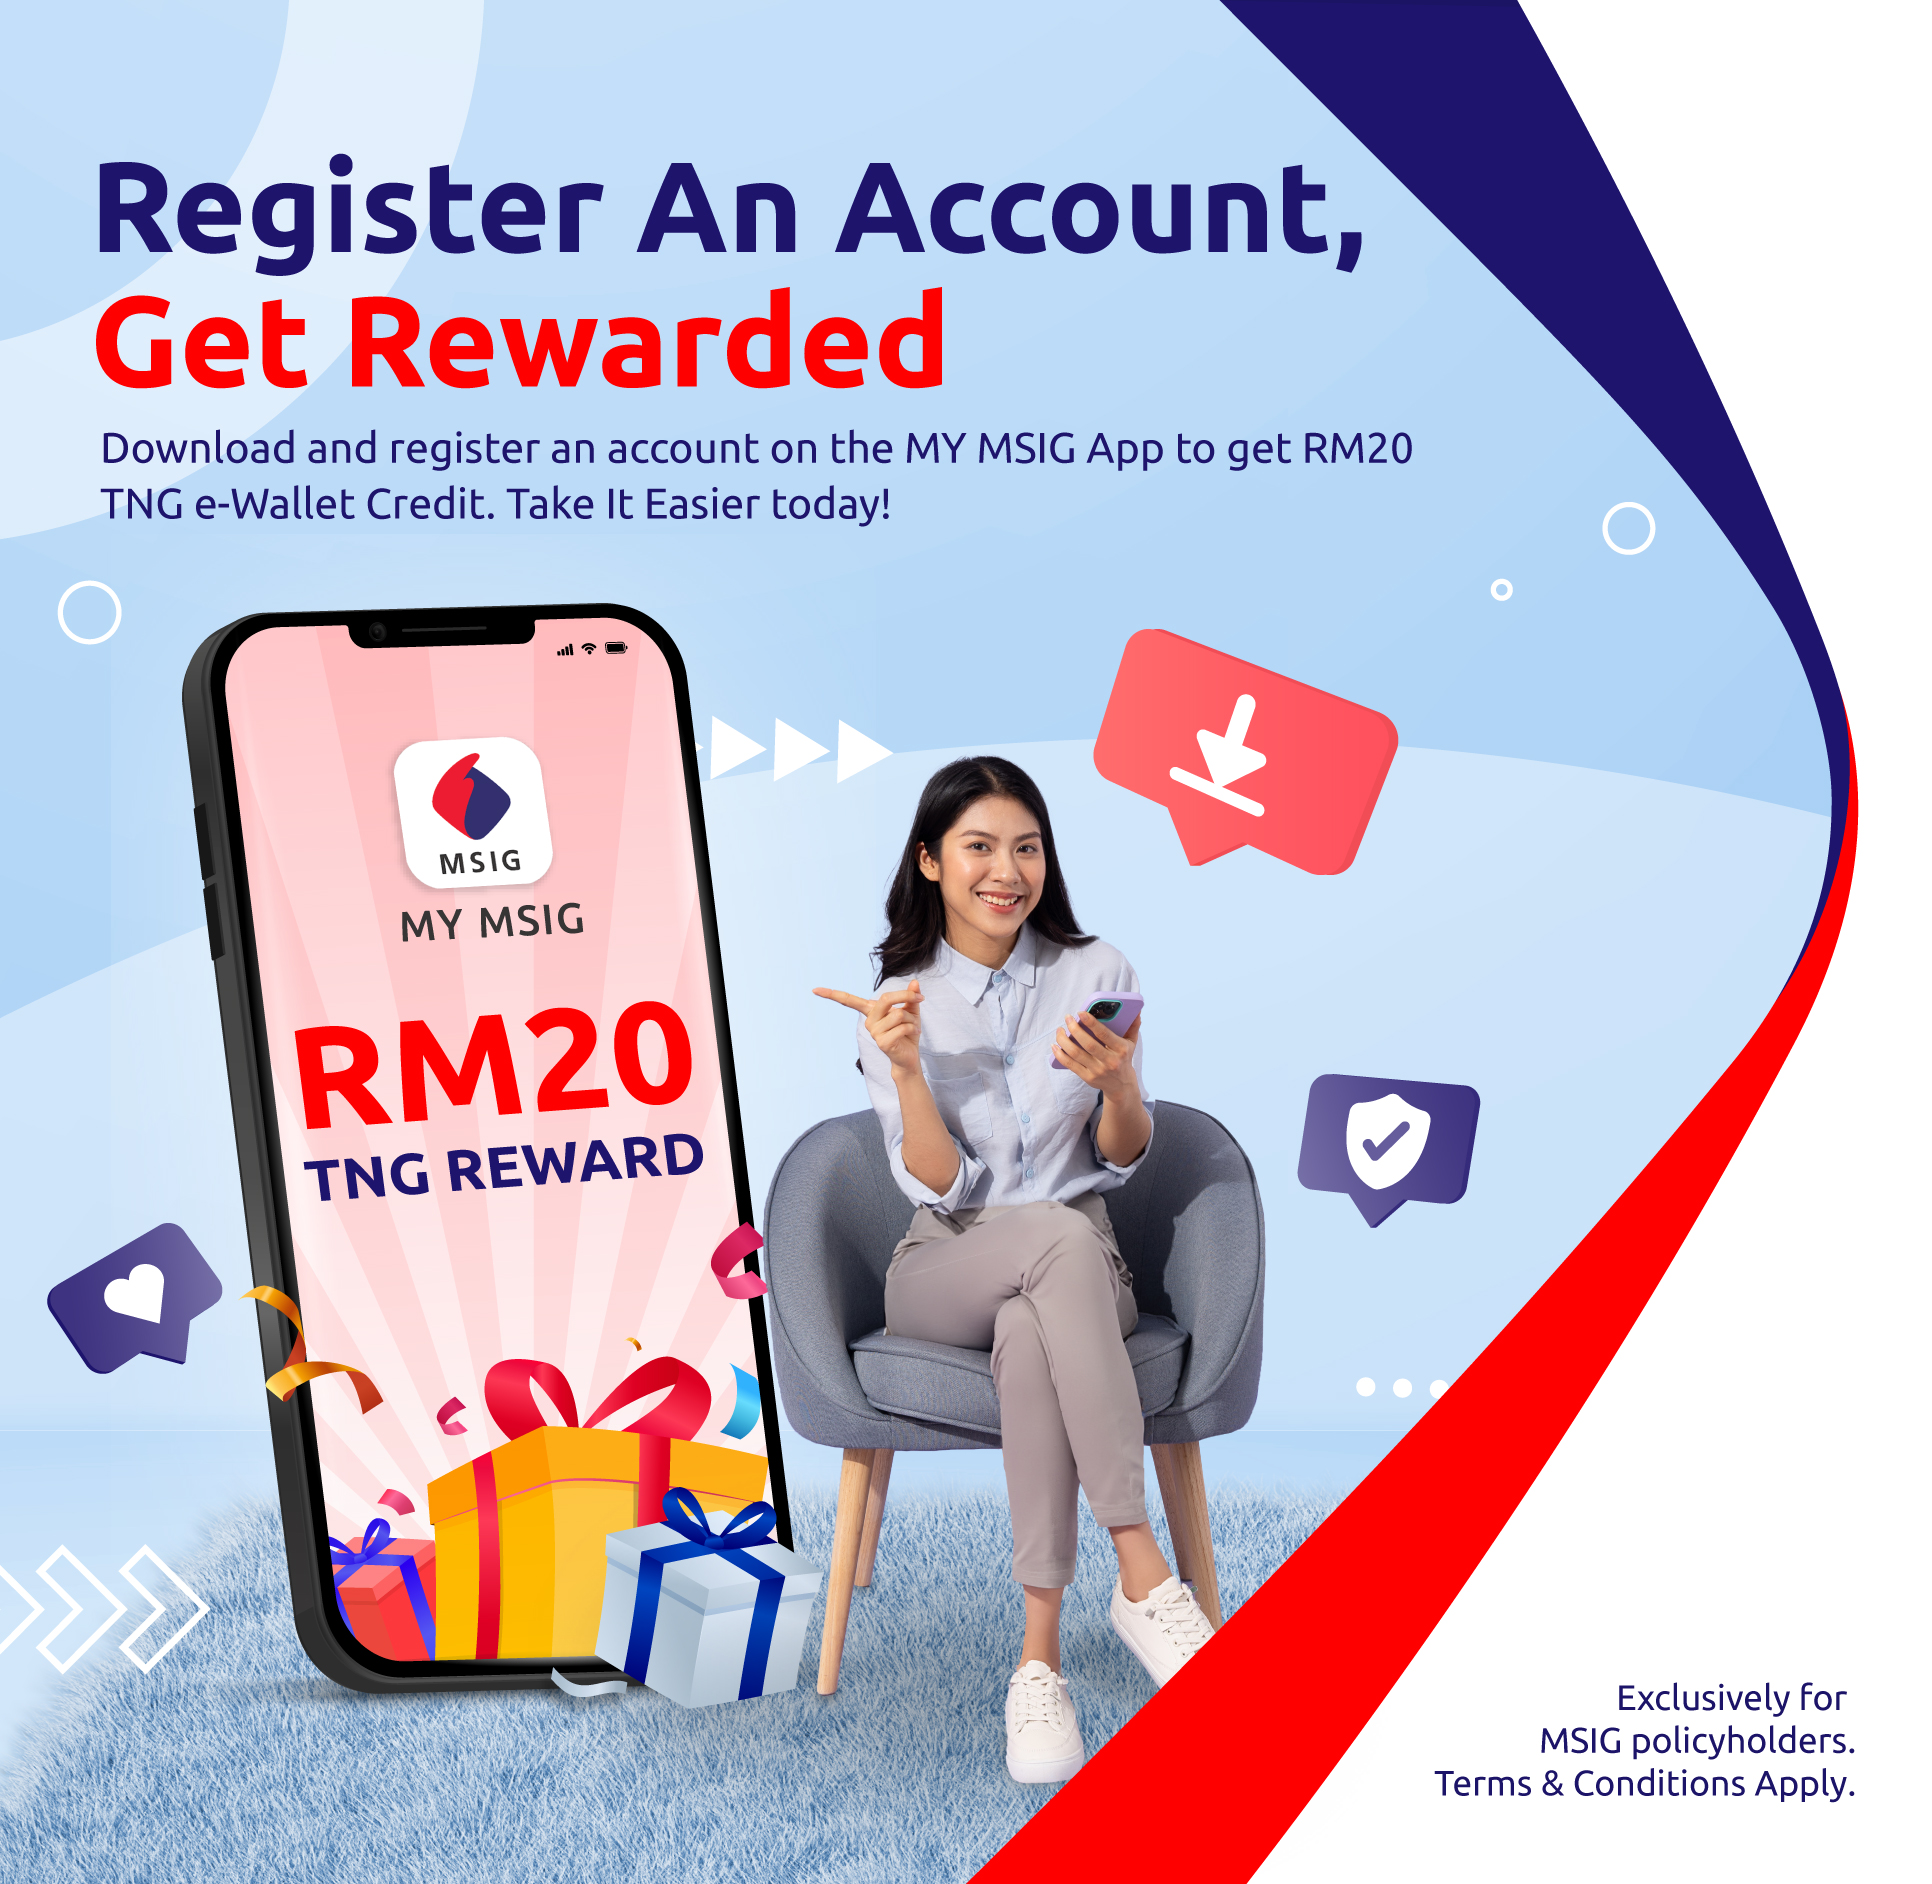 Image of Register An Account, Get Rewarded